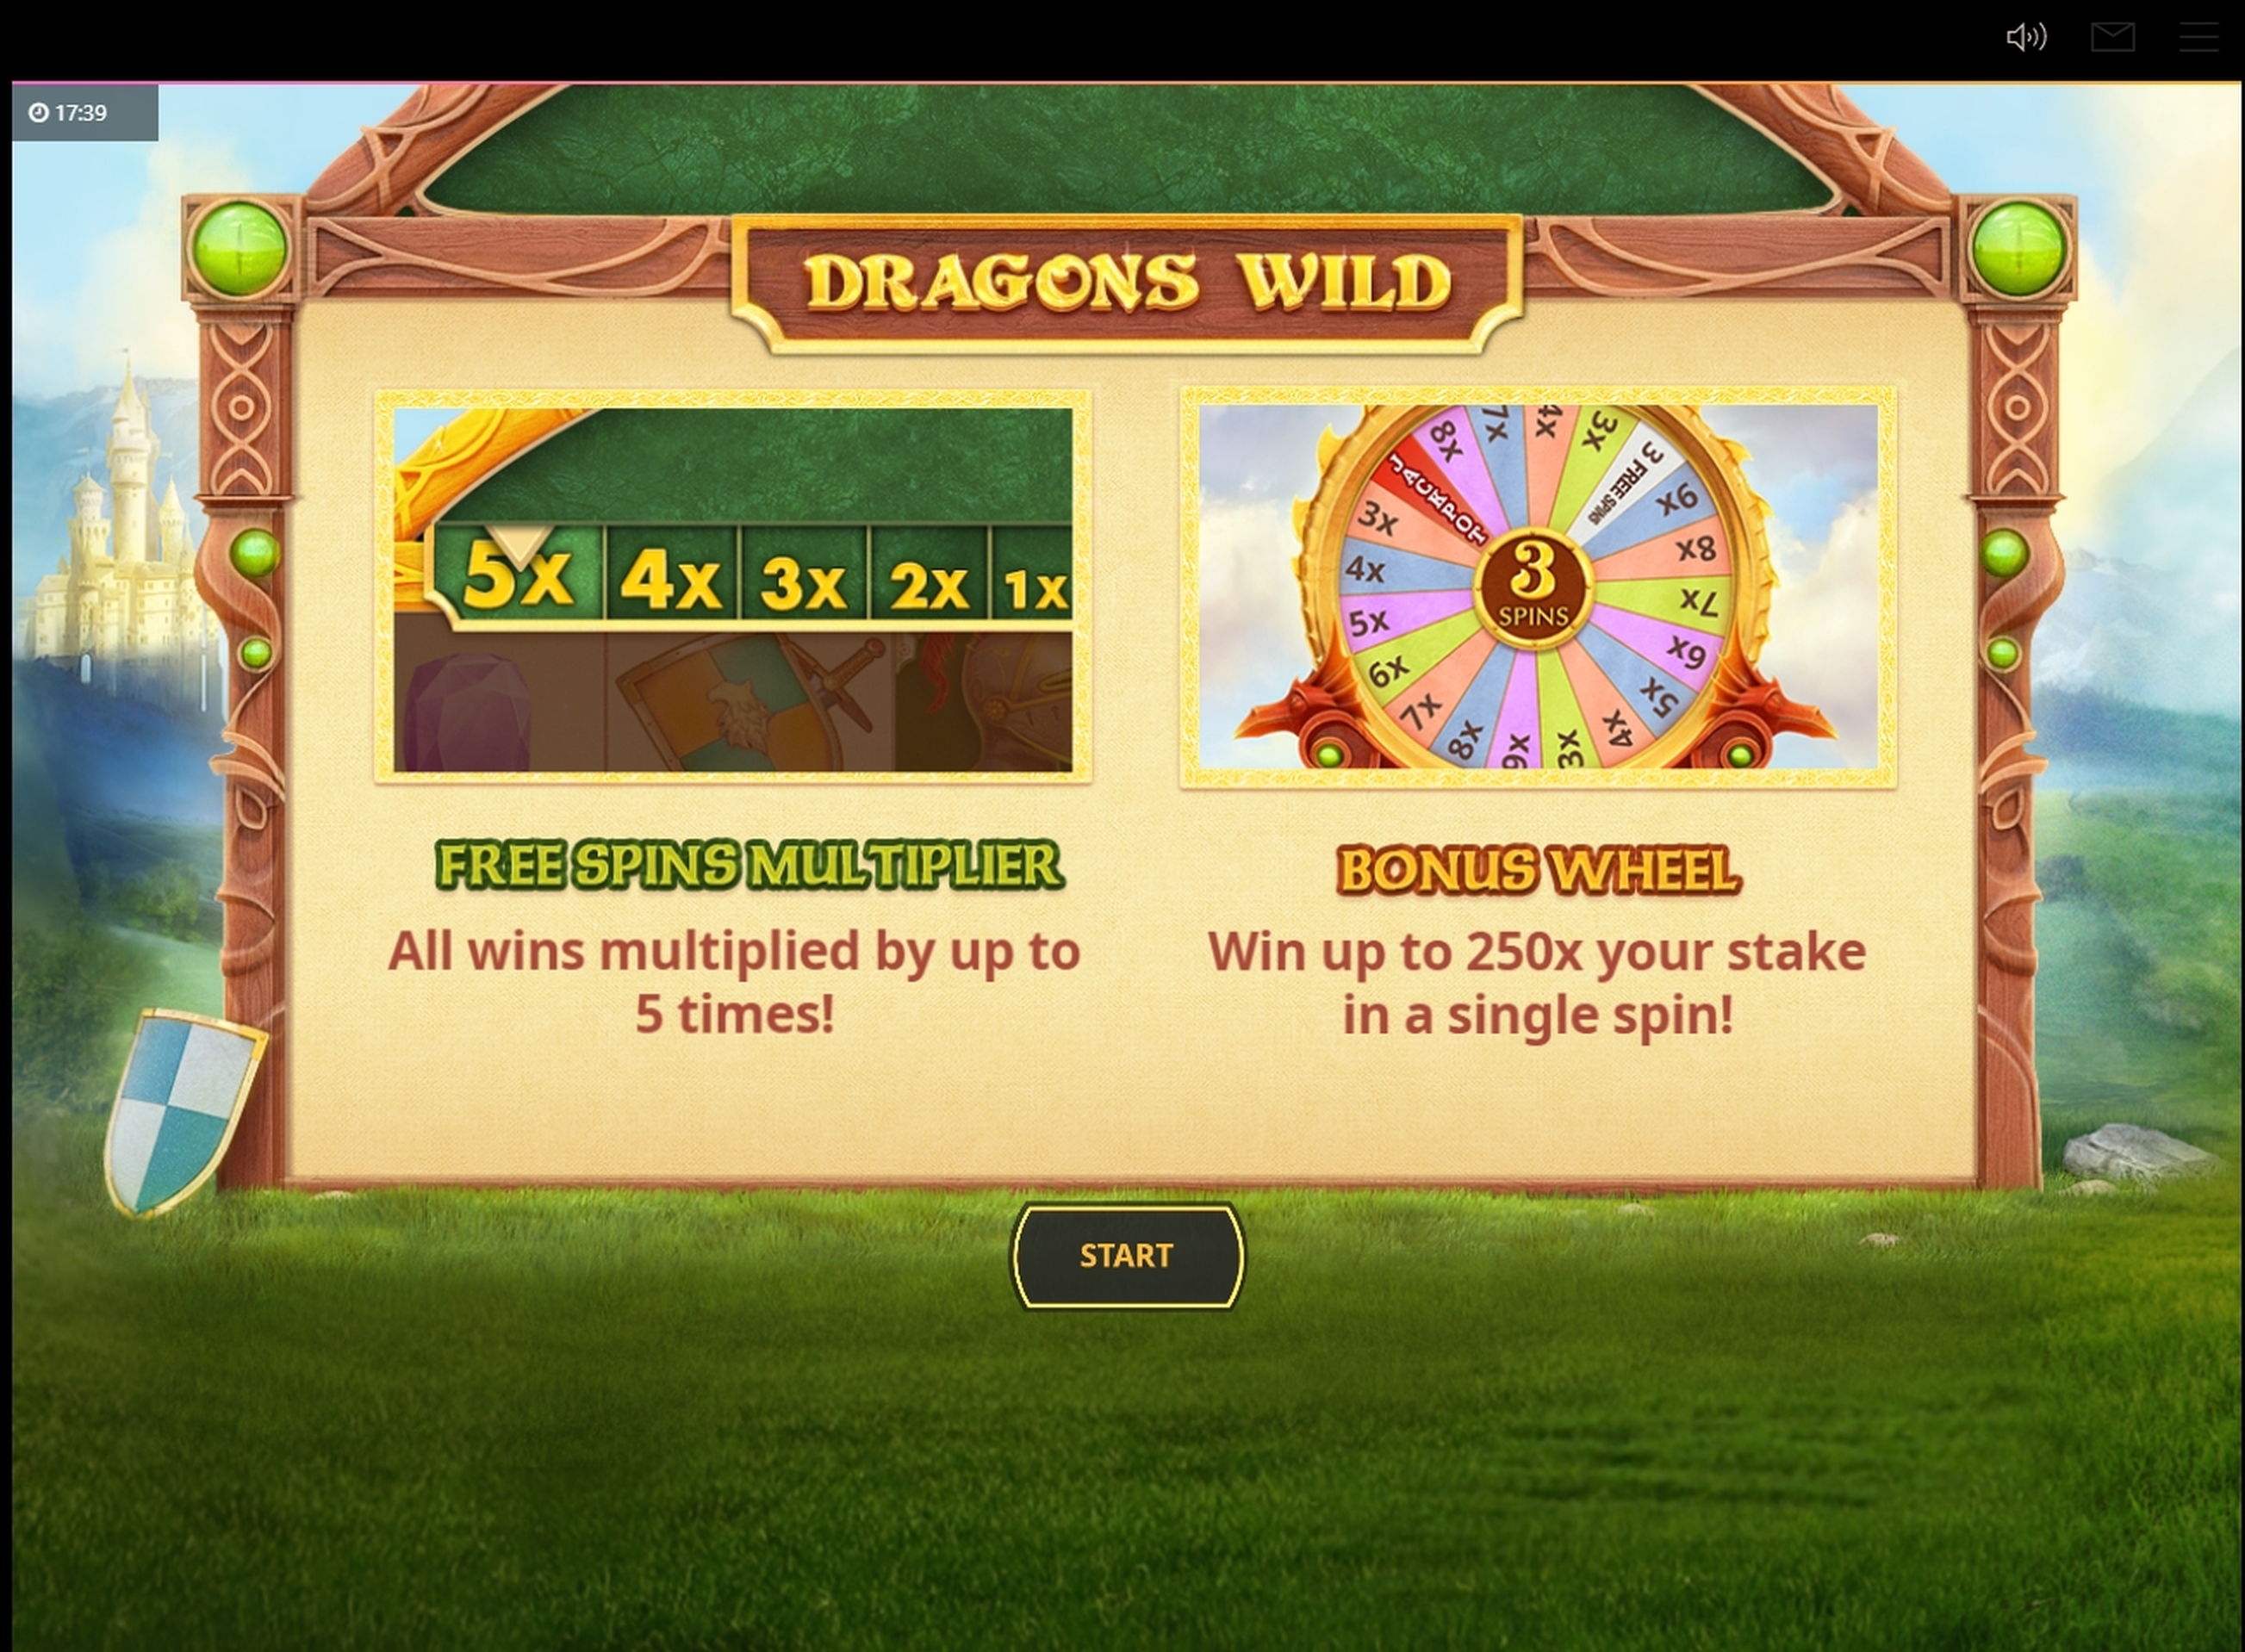 Play Dragons Wild Free Casino Slot Game by Cayetano Gaming